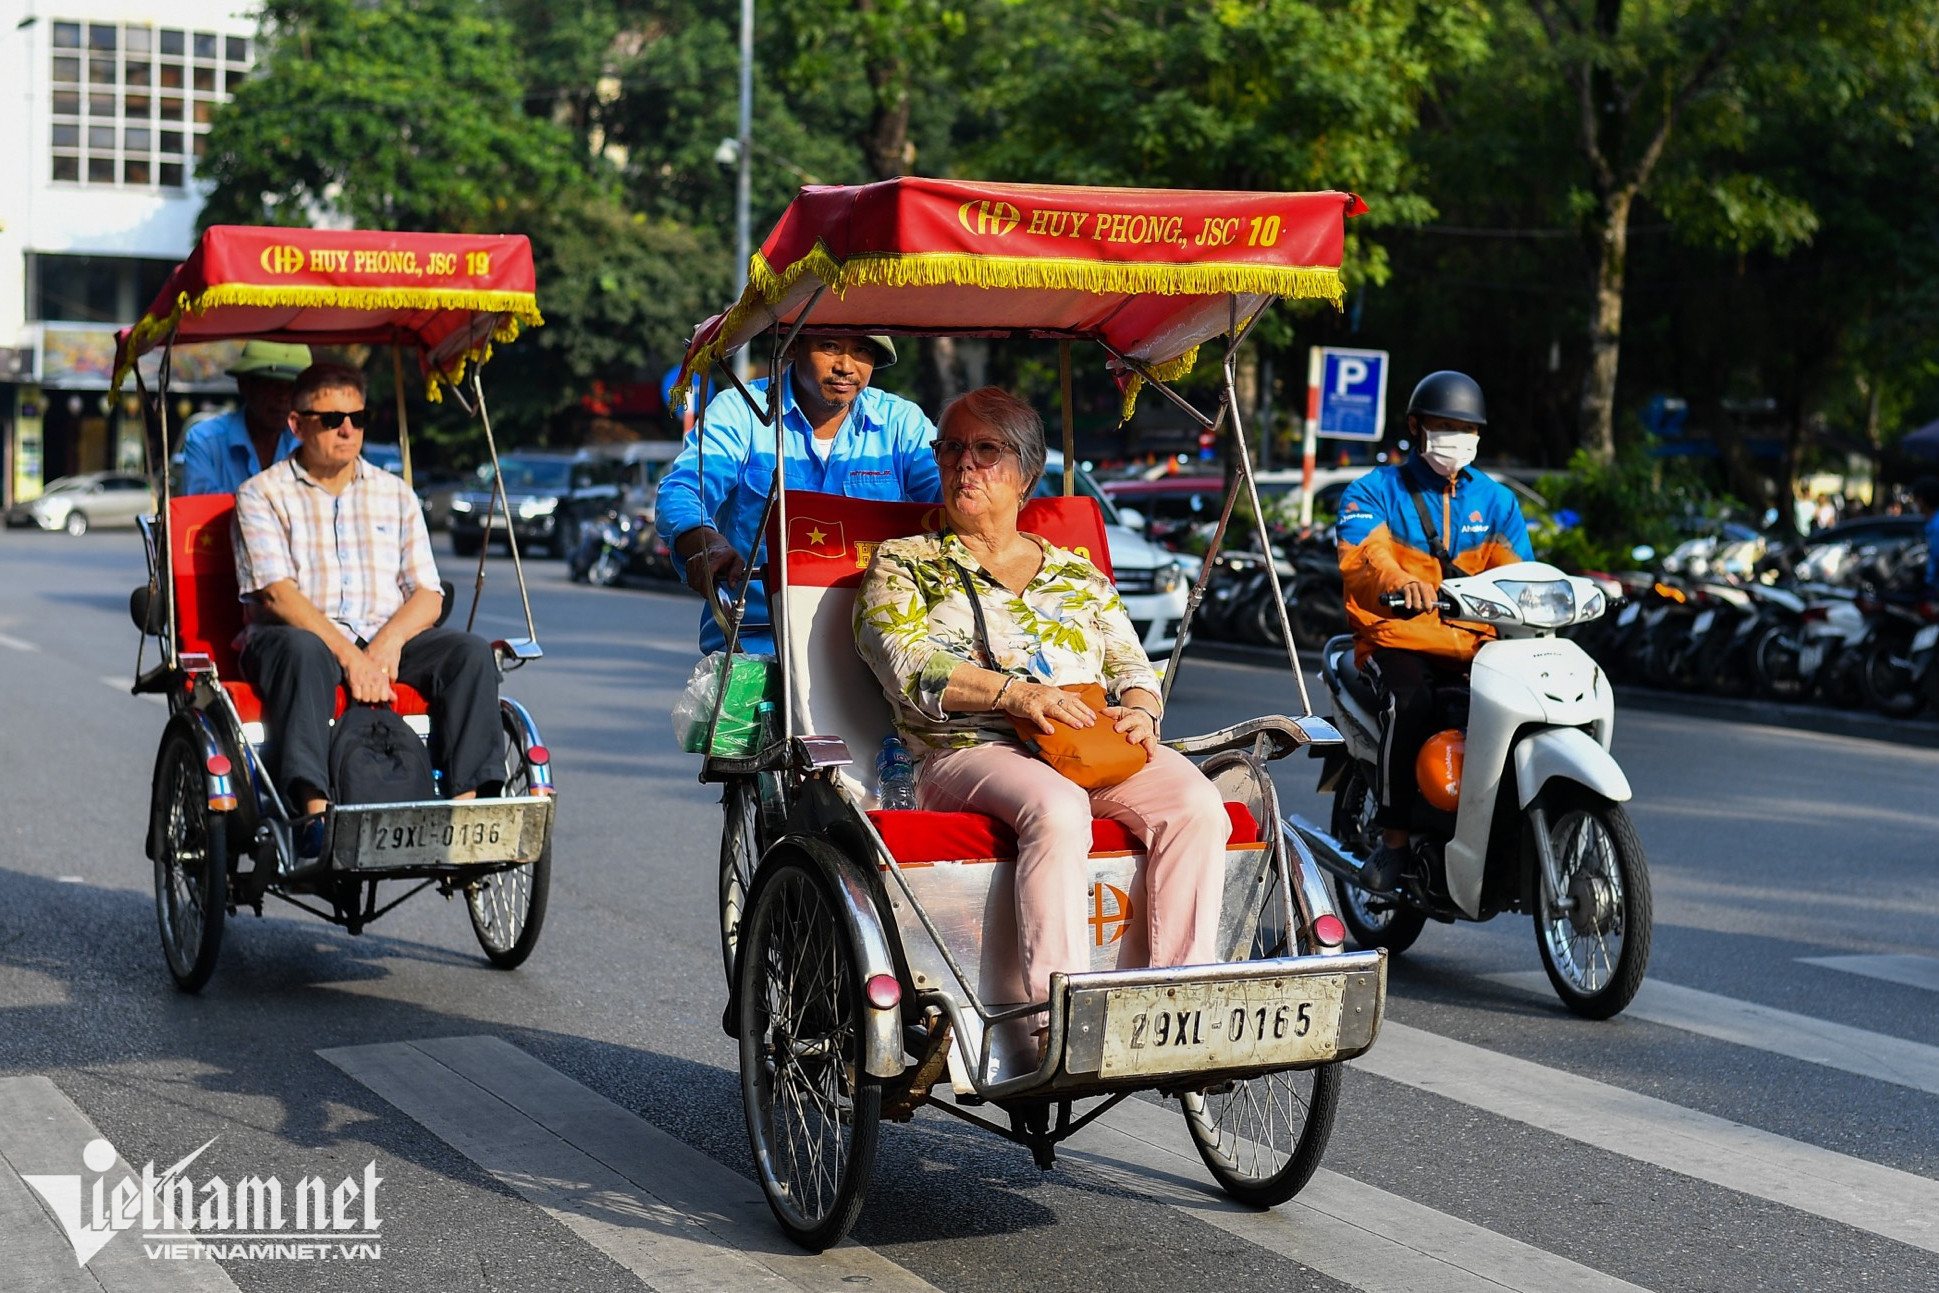 Opportunities and challenges for Vietnam’s tourism